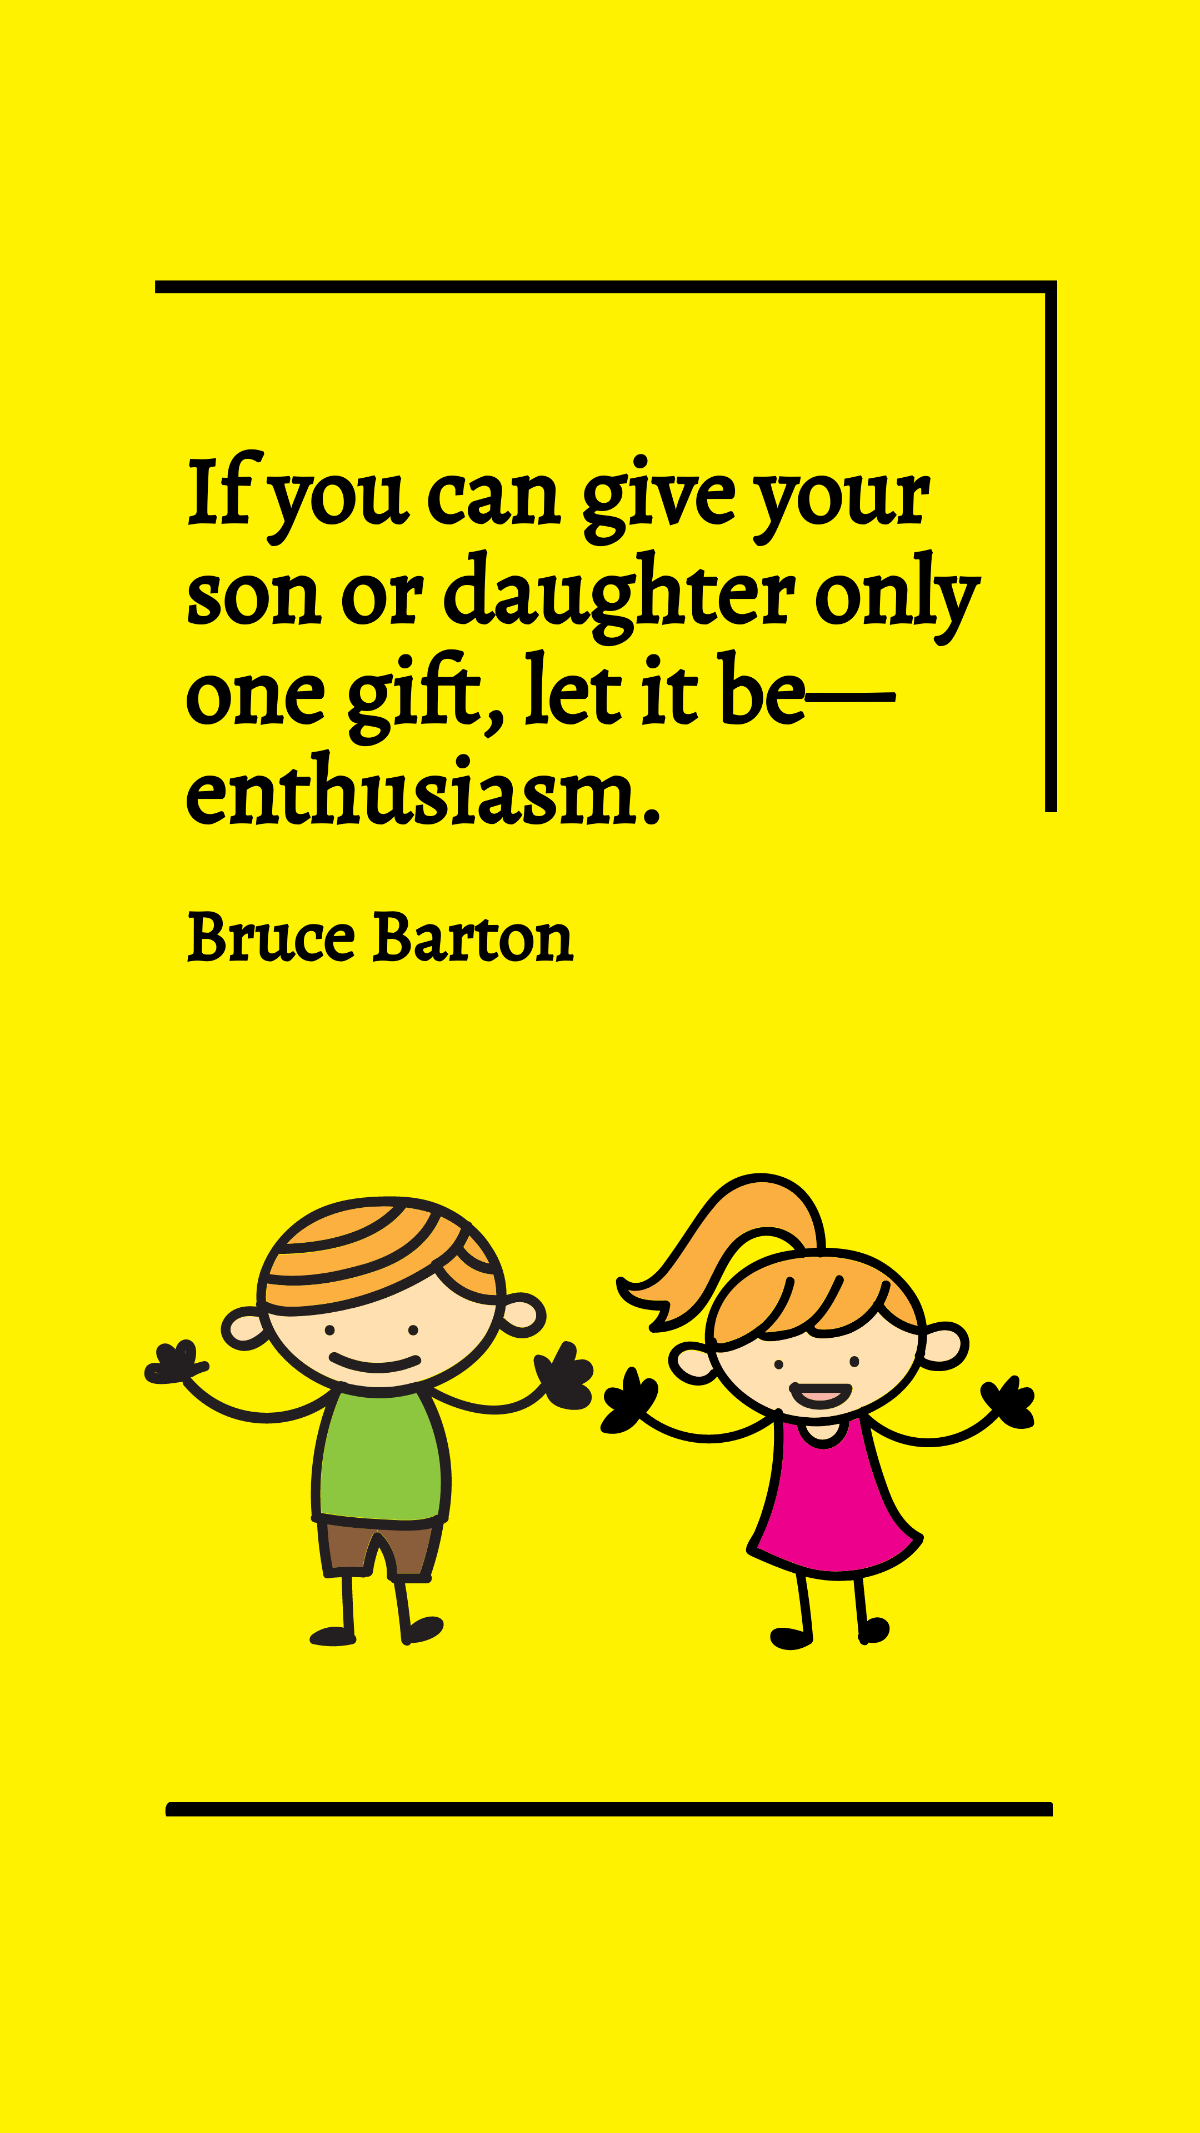 Bruce Barton - If you can give your son or daughter only one gift, let it be - enthusiasm.